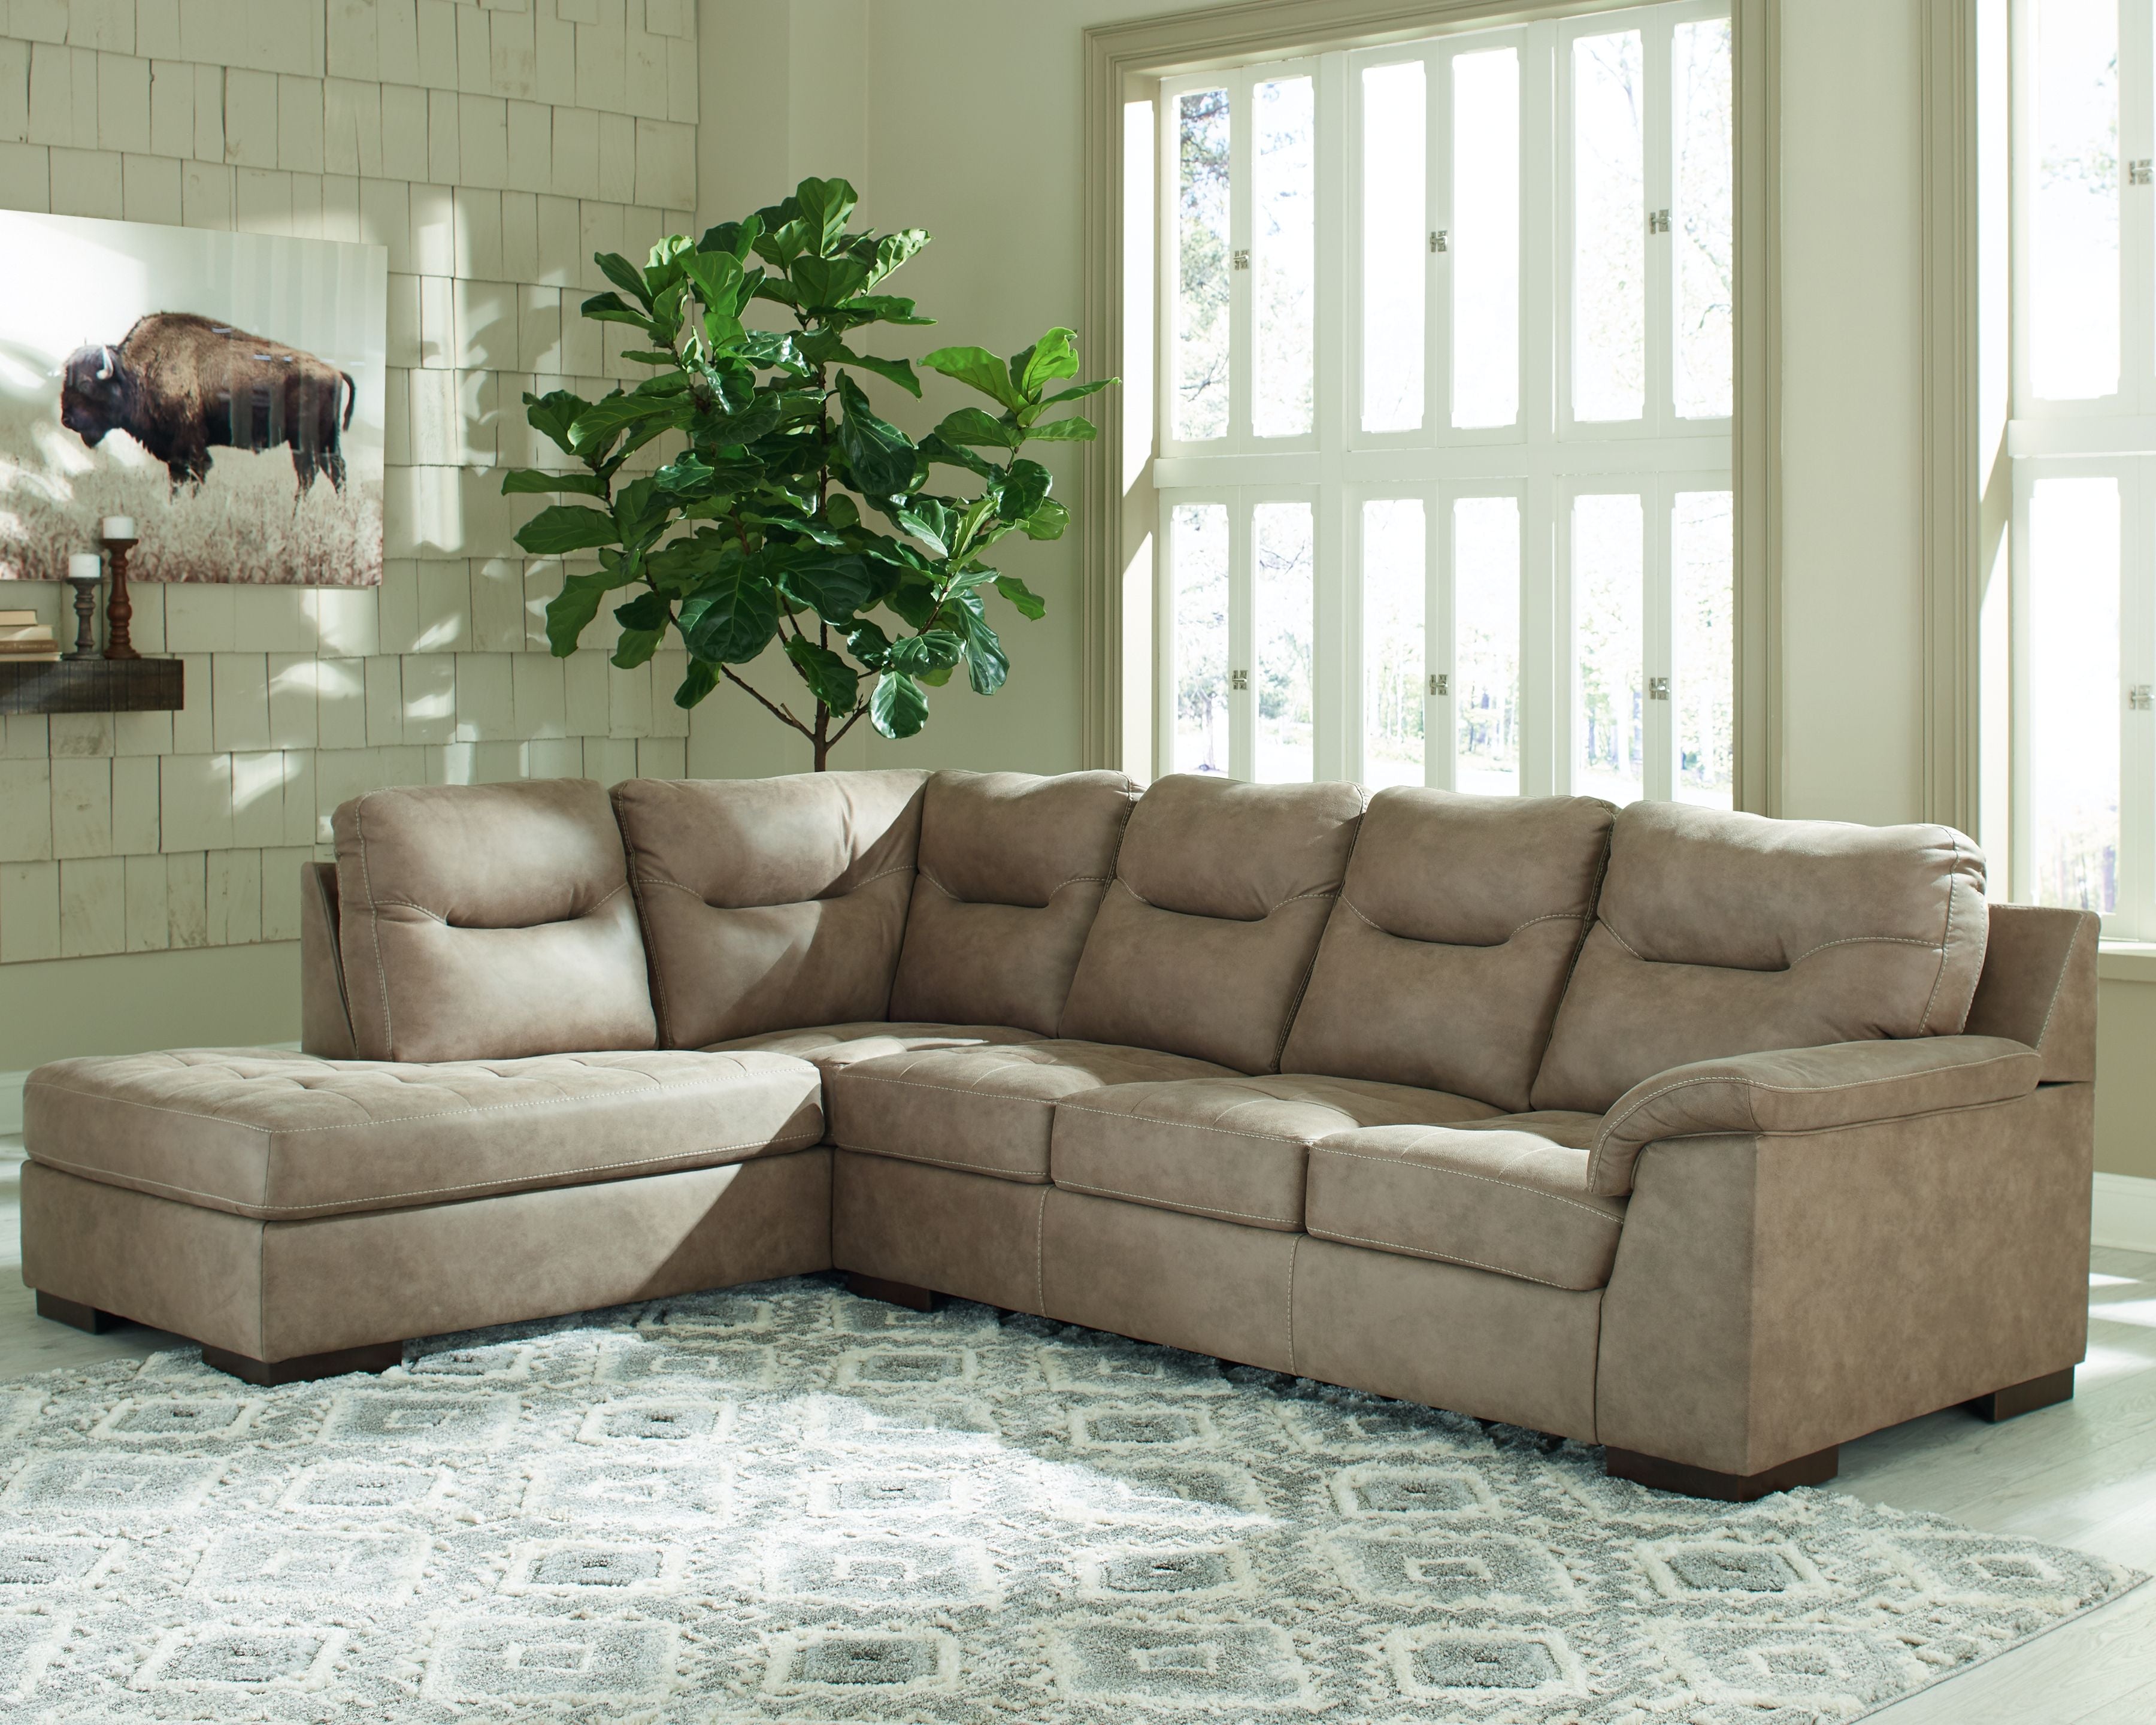 Maderla Faux Leather Sectional Sofa-Stationary Sectionals-American Furniture Outlet